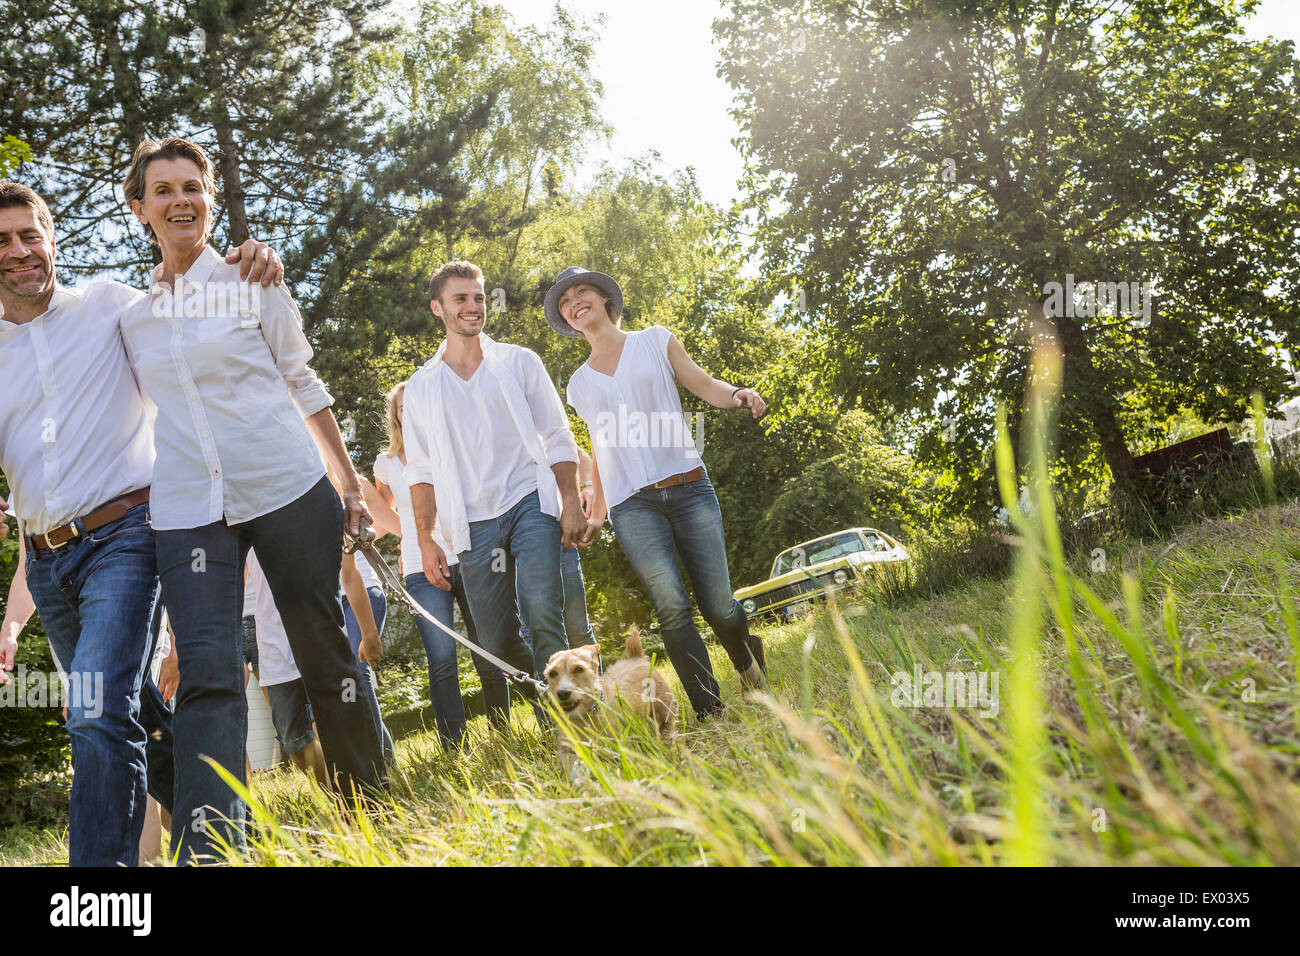 Group of people walking through forest Stock Photo